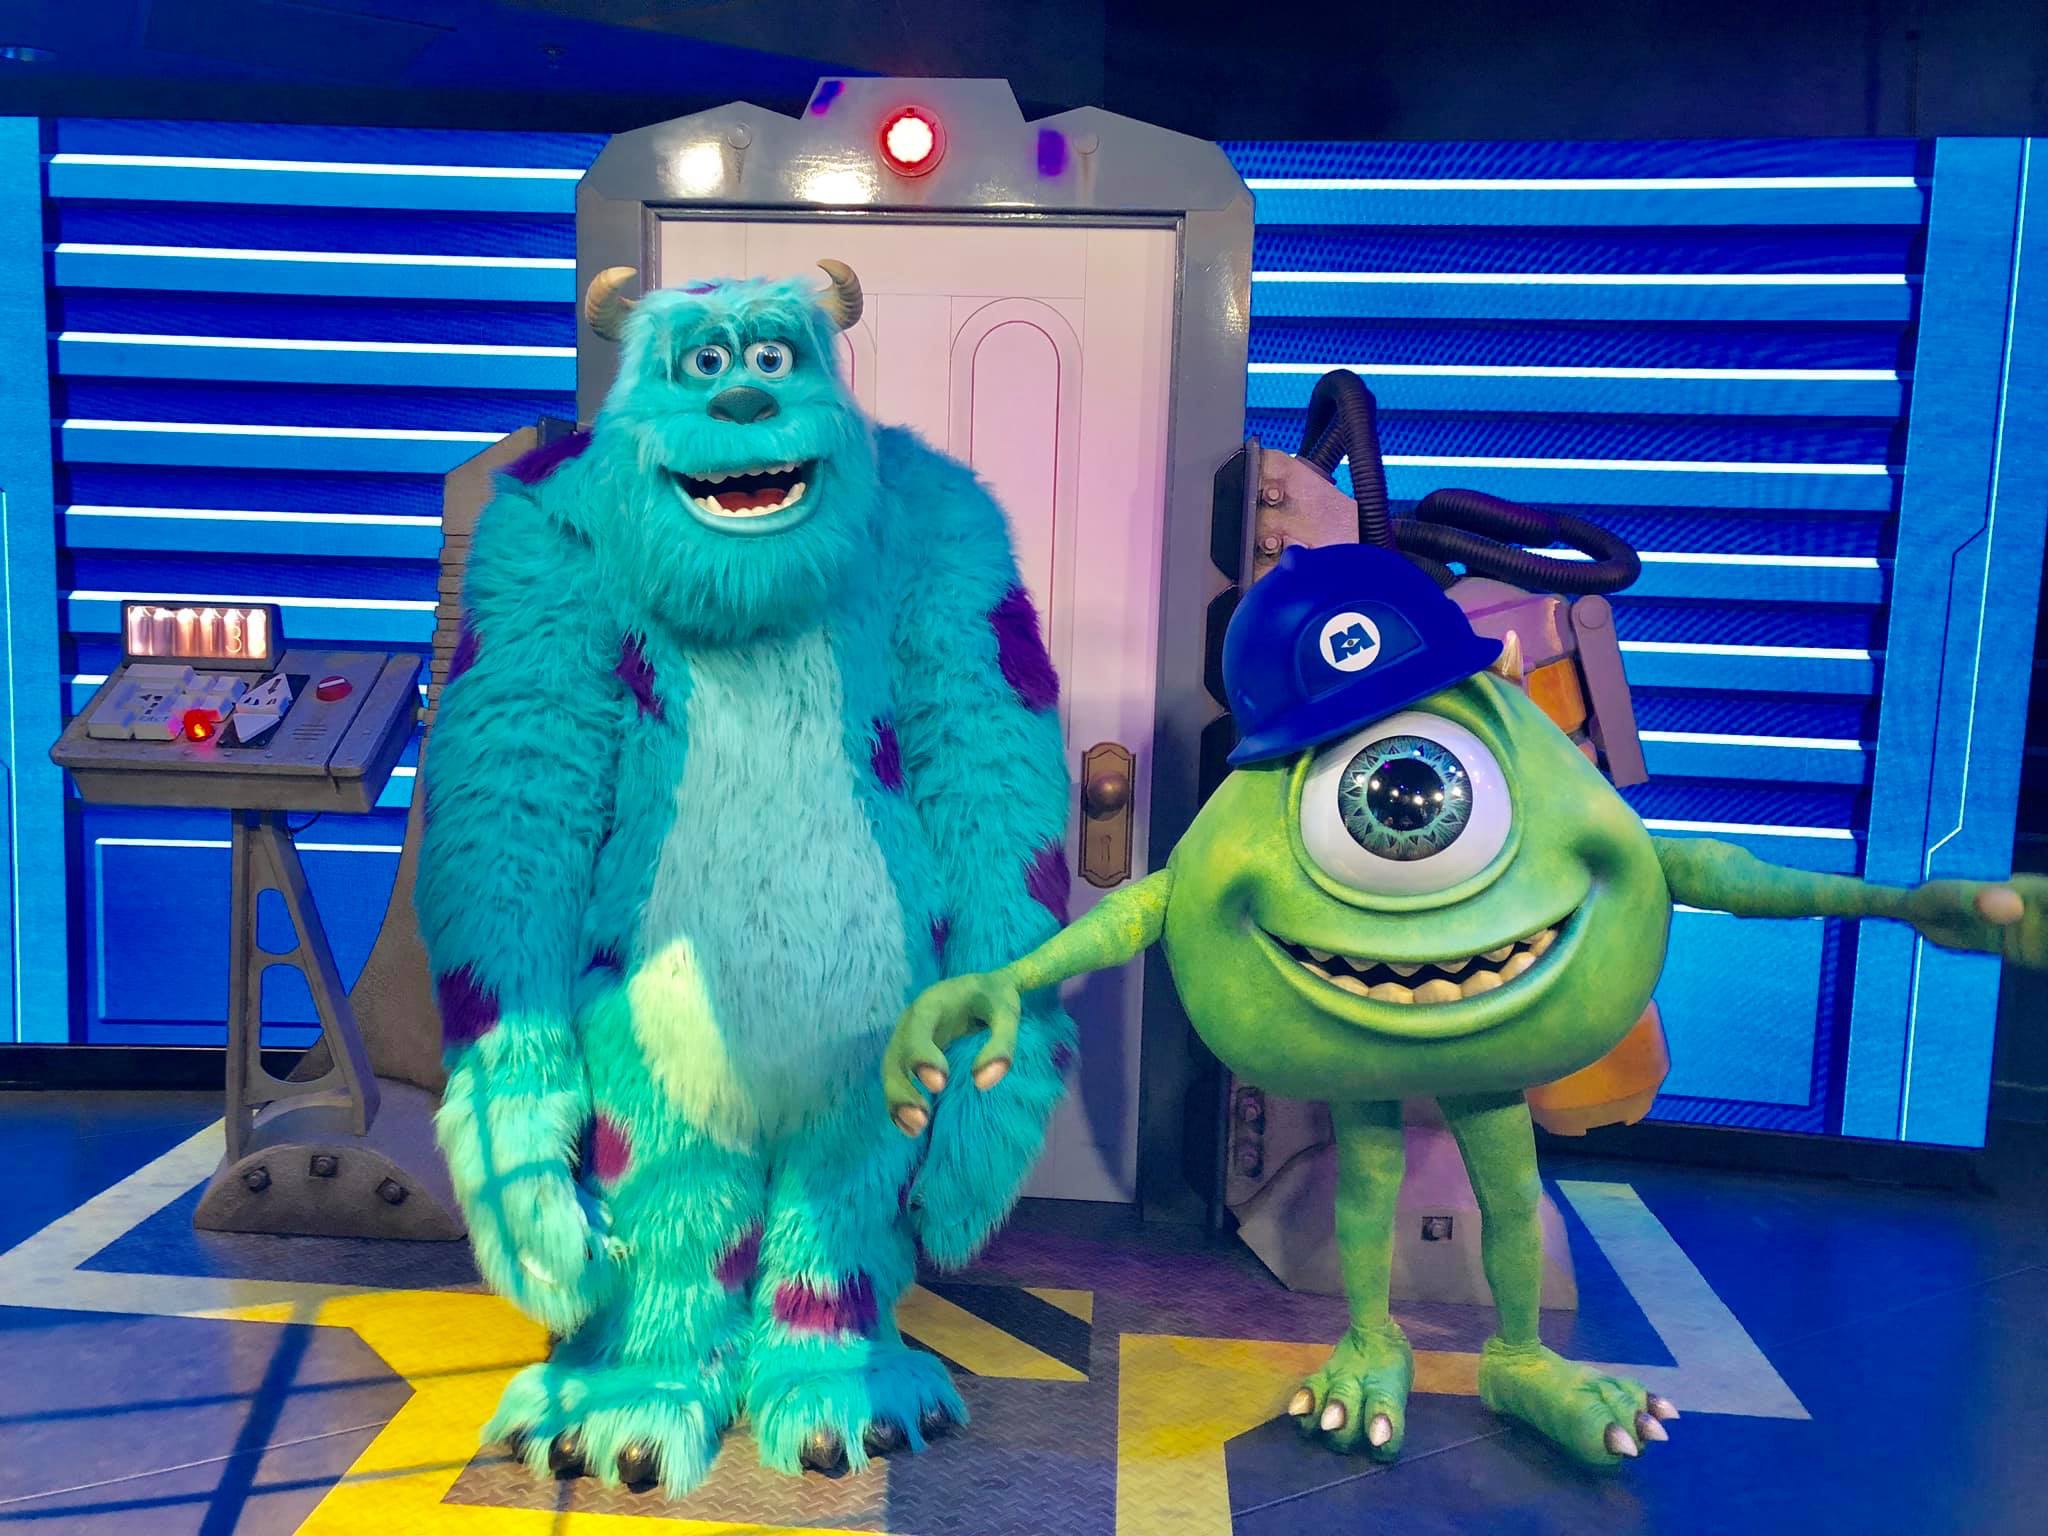 Mike Wazowski of “Monsters Inc.” Will No Longer Meet Guests at Disney Hollywood Studios